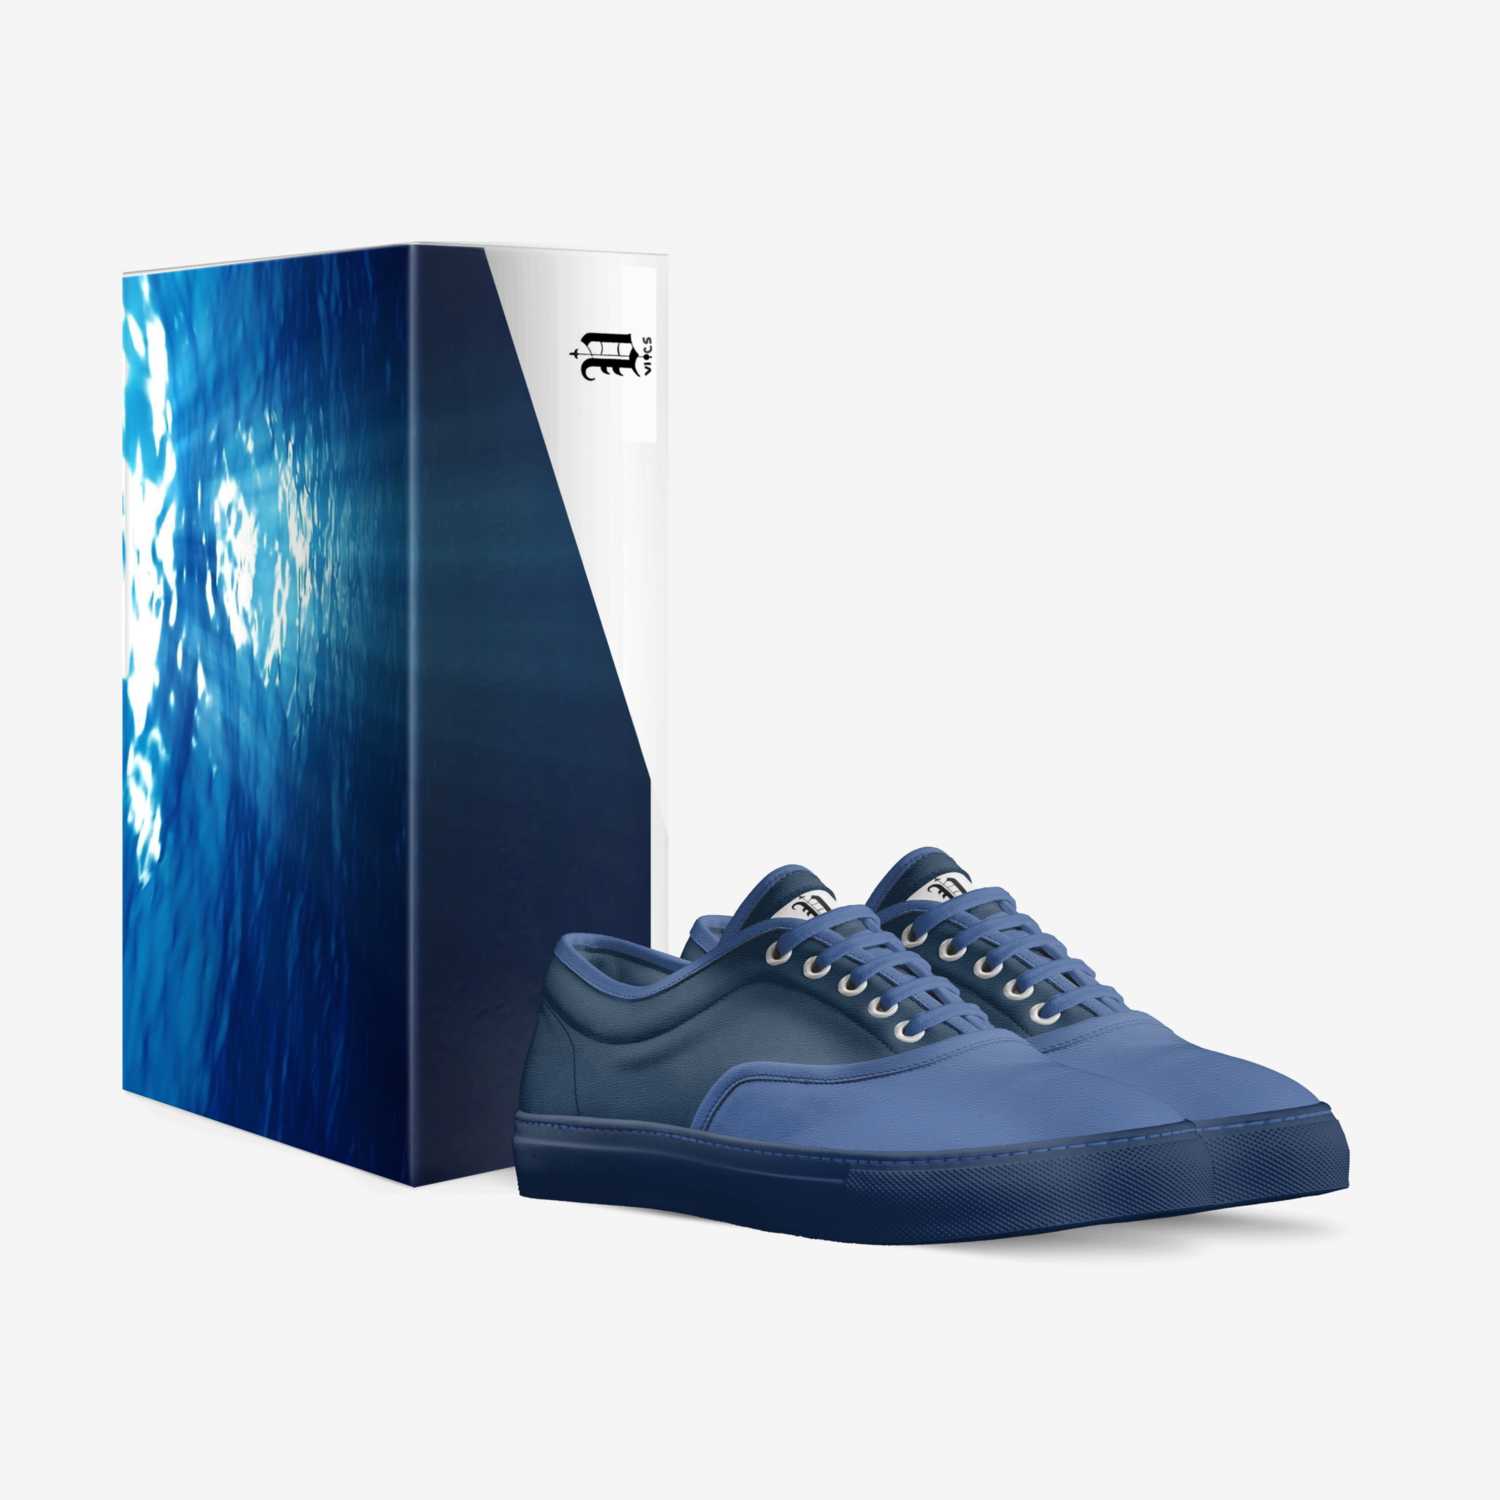 vics ocean 2 custom made in Italy shoes by Brayden Murphy | Box view